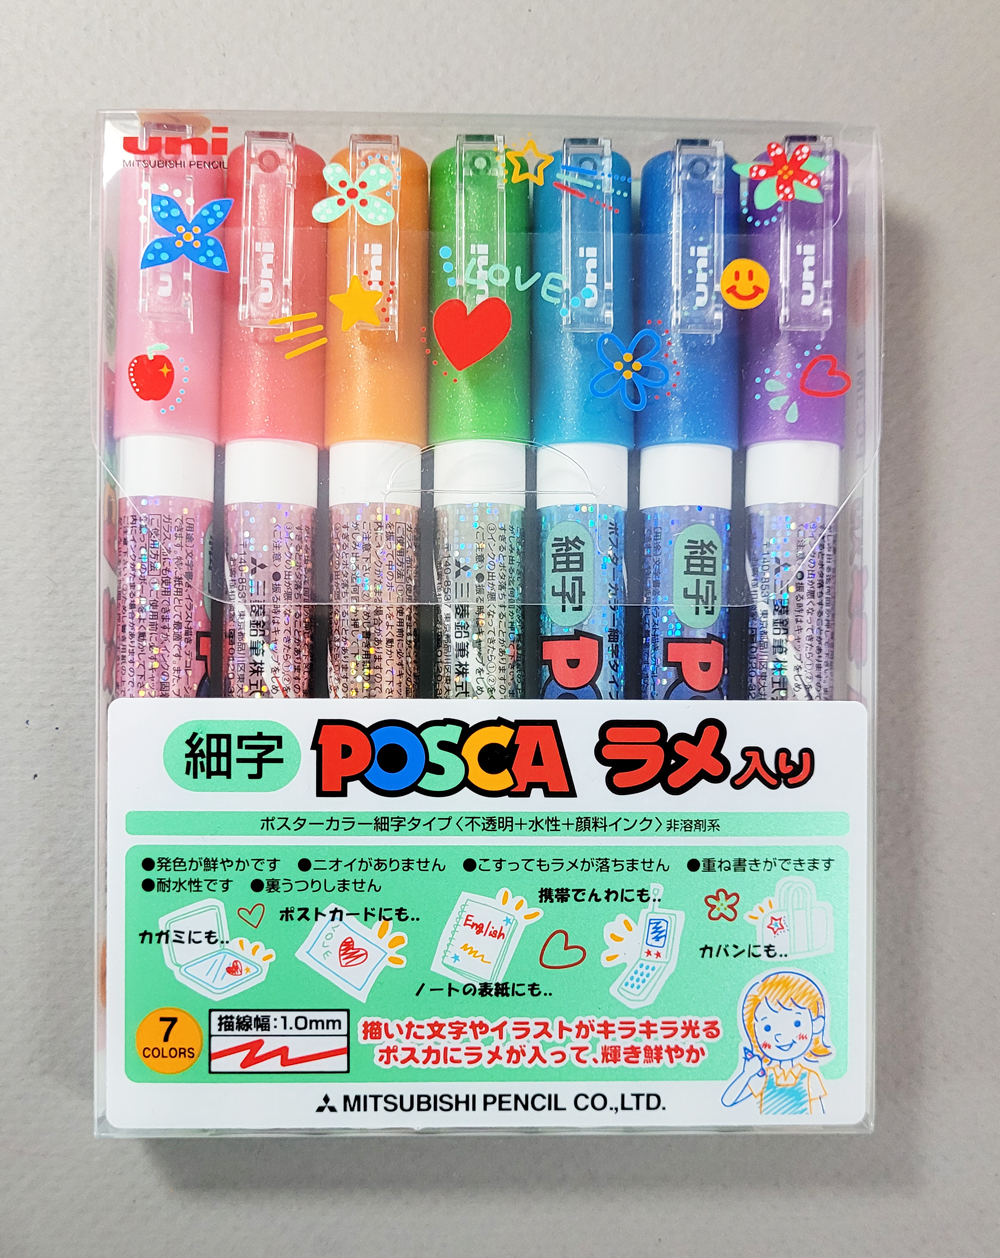  Uni Posca Black Board Marker -Thick Point-6 Colors Set  (PCE50017K6C) : Office Products